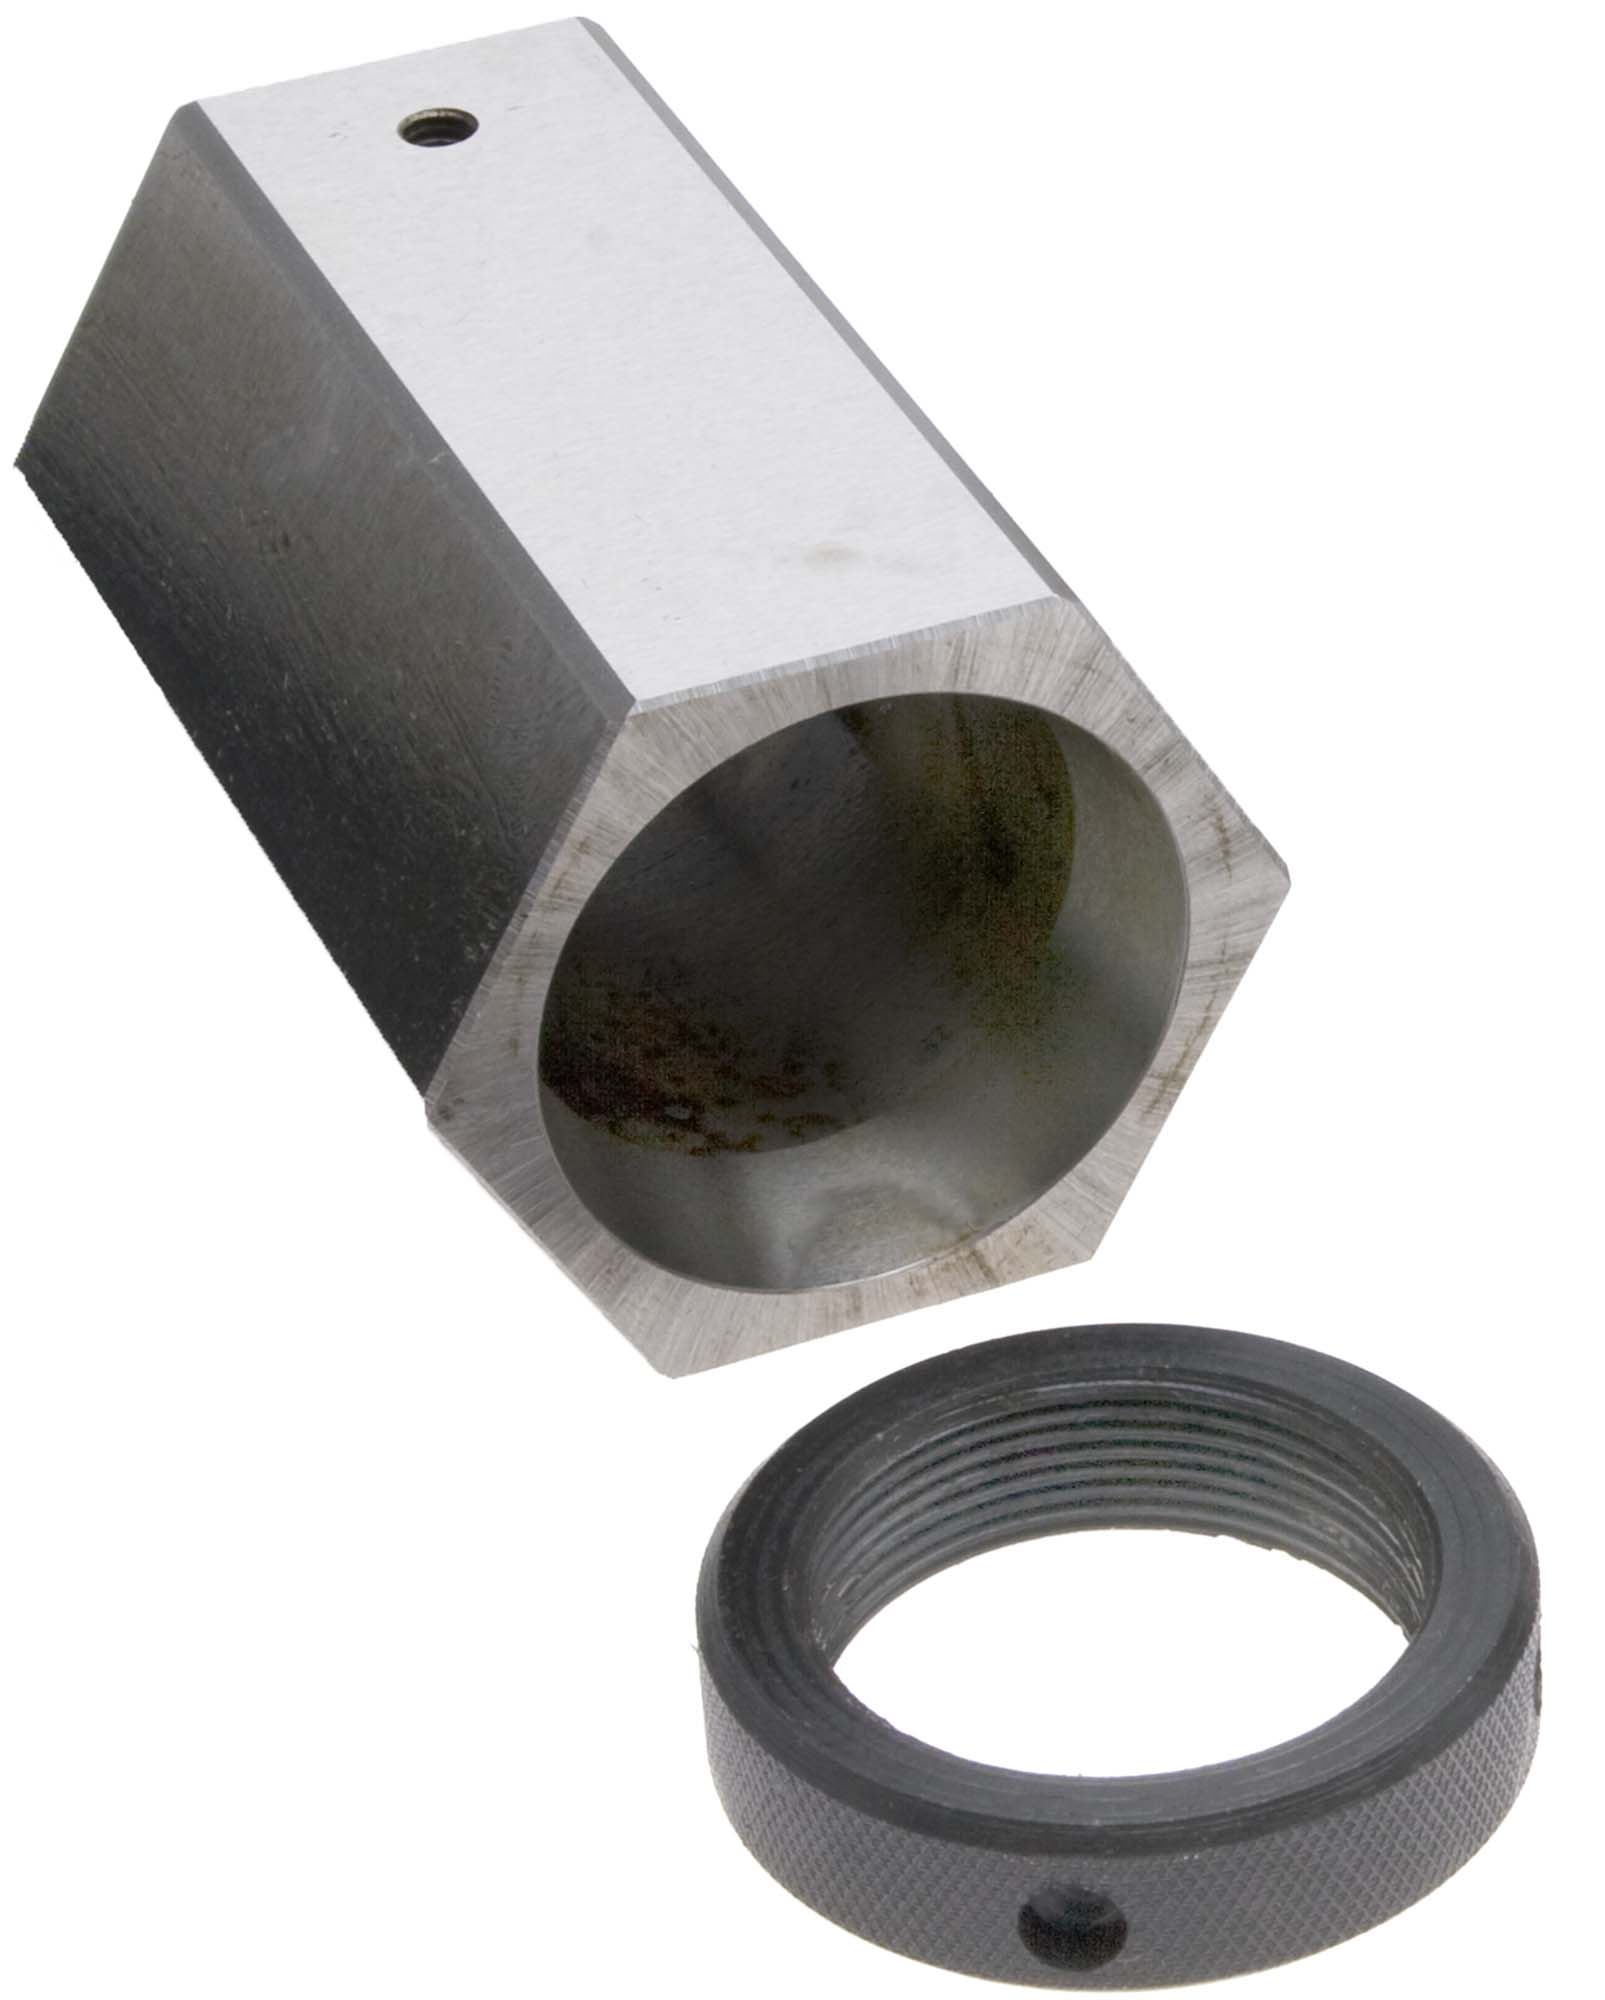 5C-HXCB 5C Hex Collet Block with Ring Closer